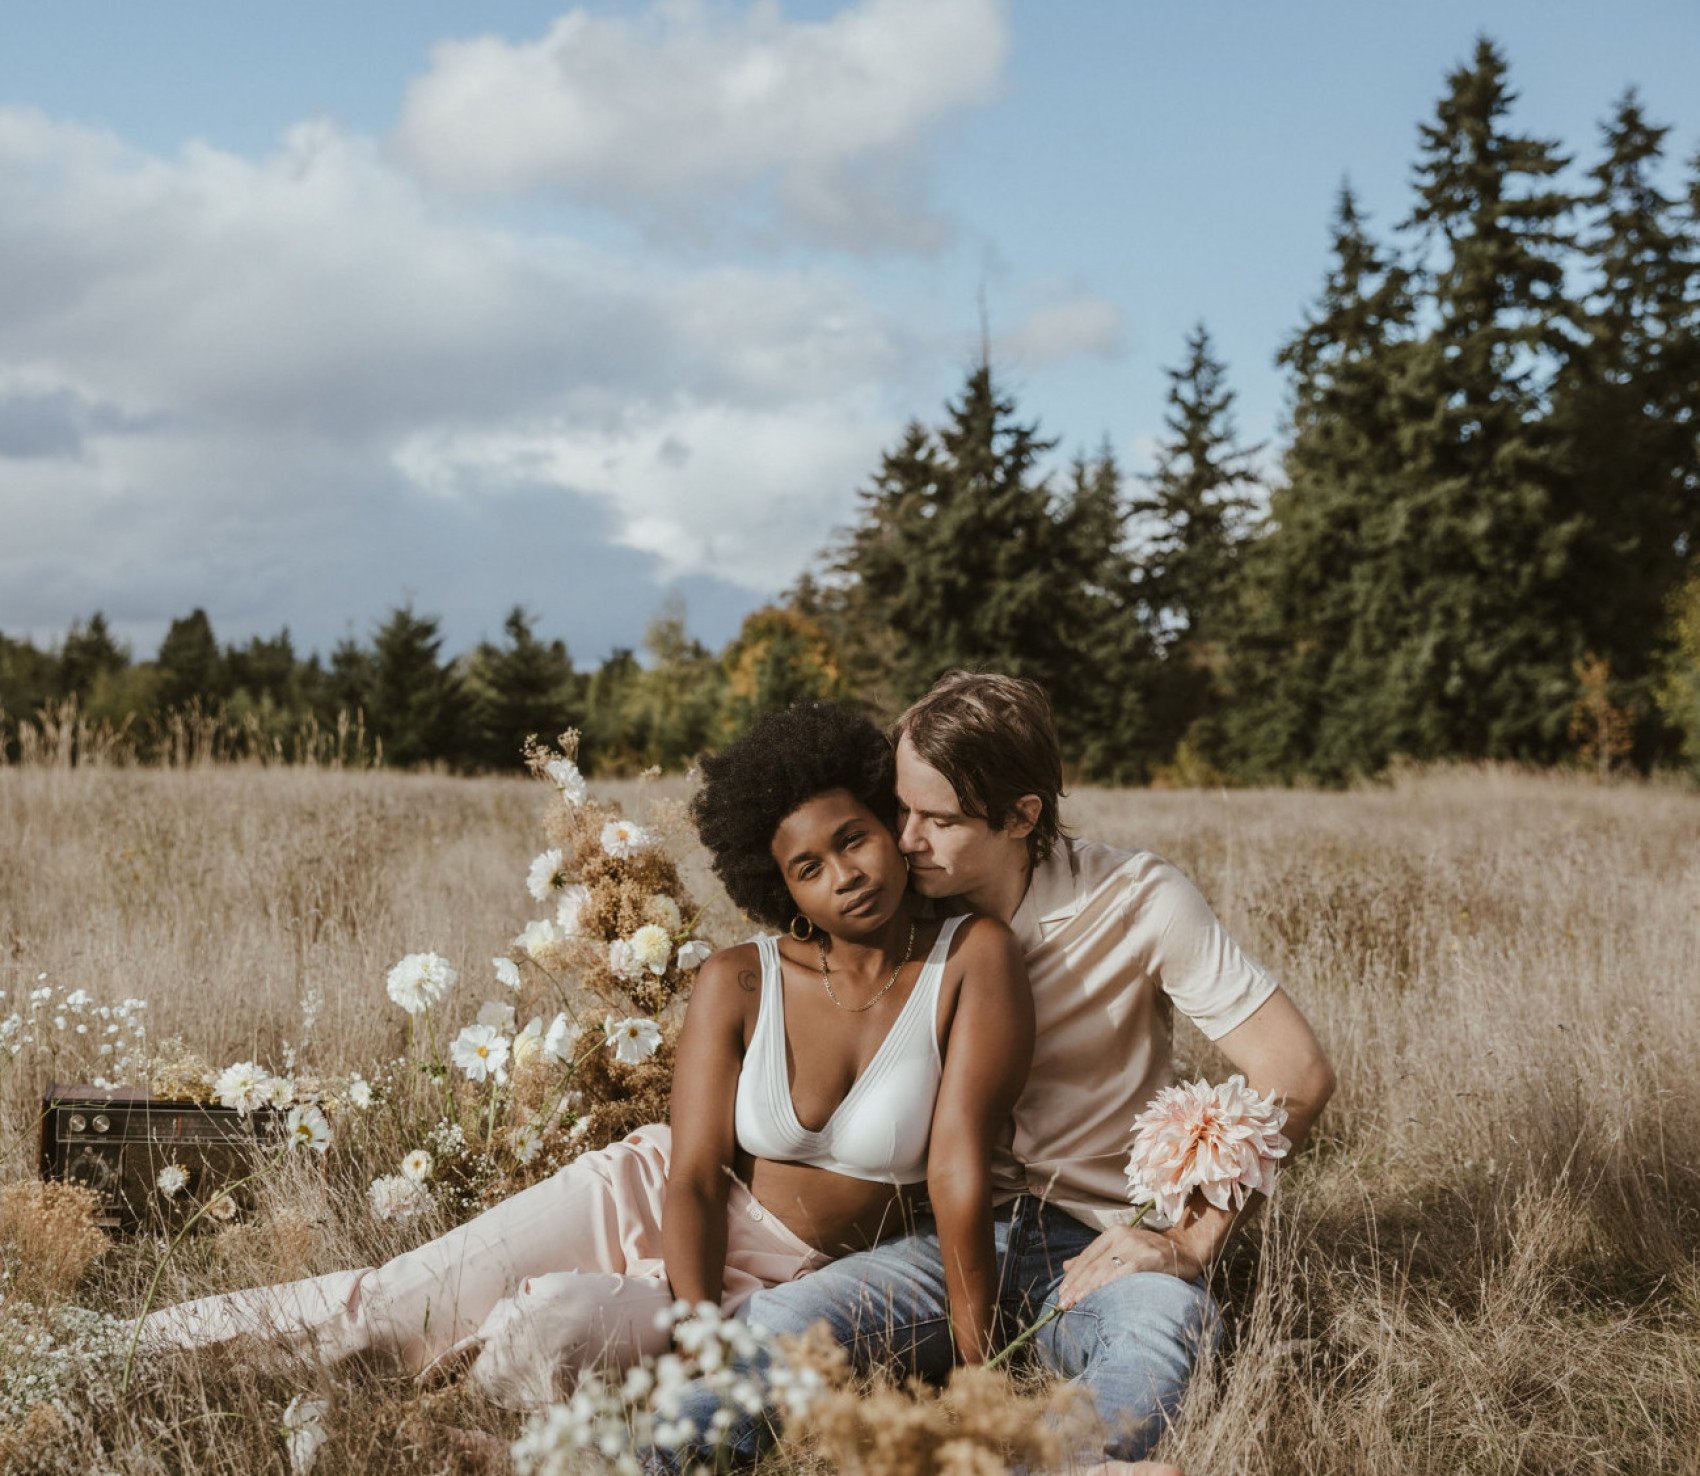 Picturesque Outdoor Couple Portraits We Love  Couple picture poses  Wedding couple poses Wedding couple poses photography